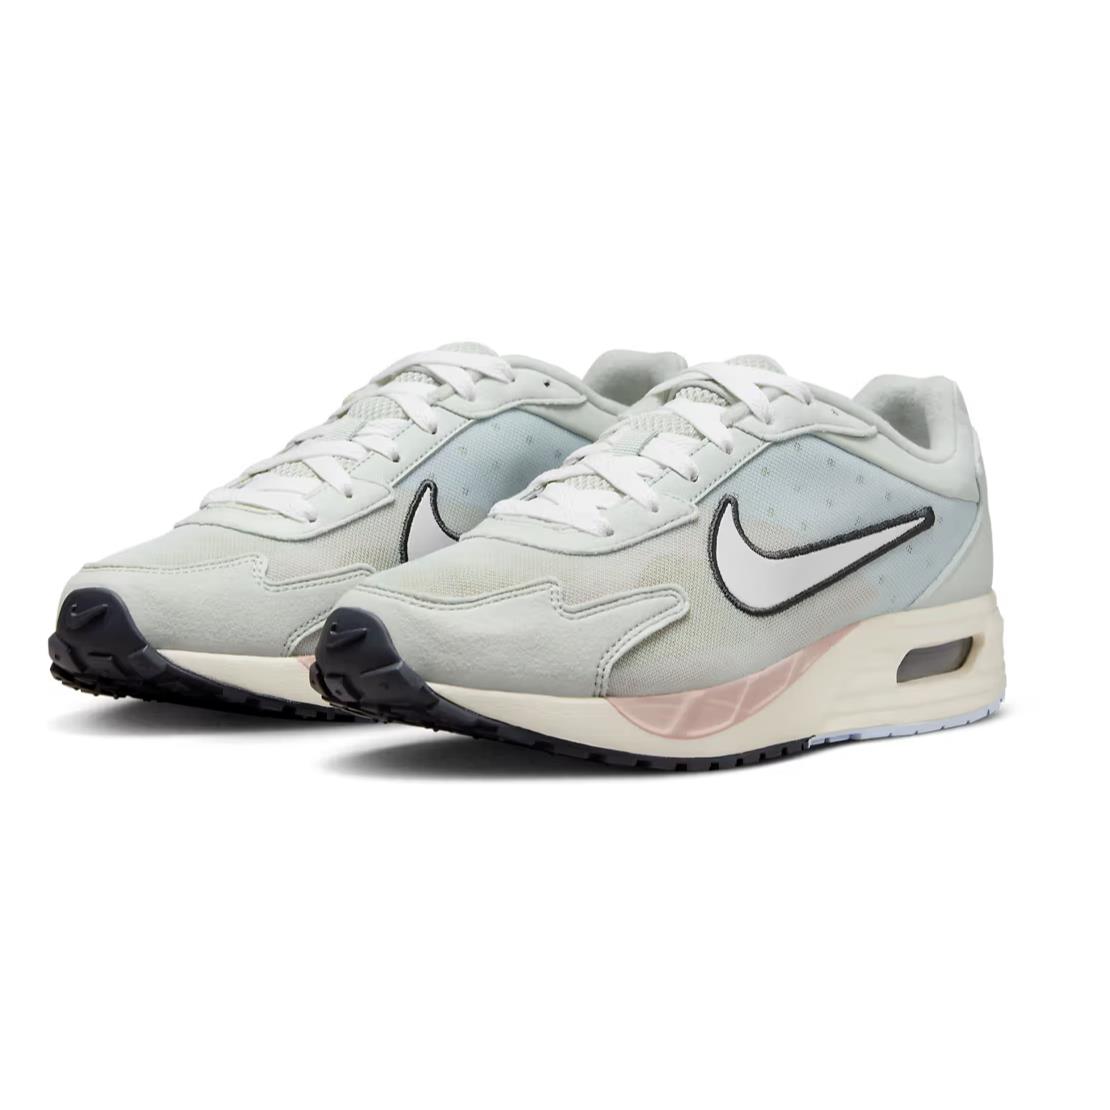 Nike Air Max Solo Mens Size 8.5 Shoes FN0784 002 Light Silver/summit White